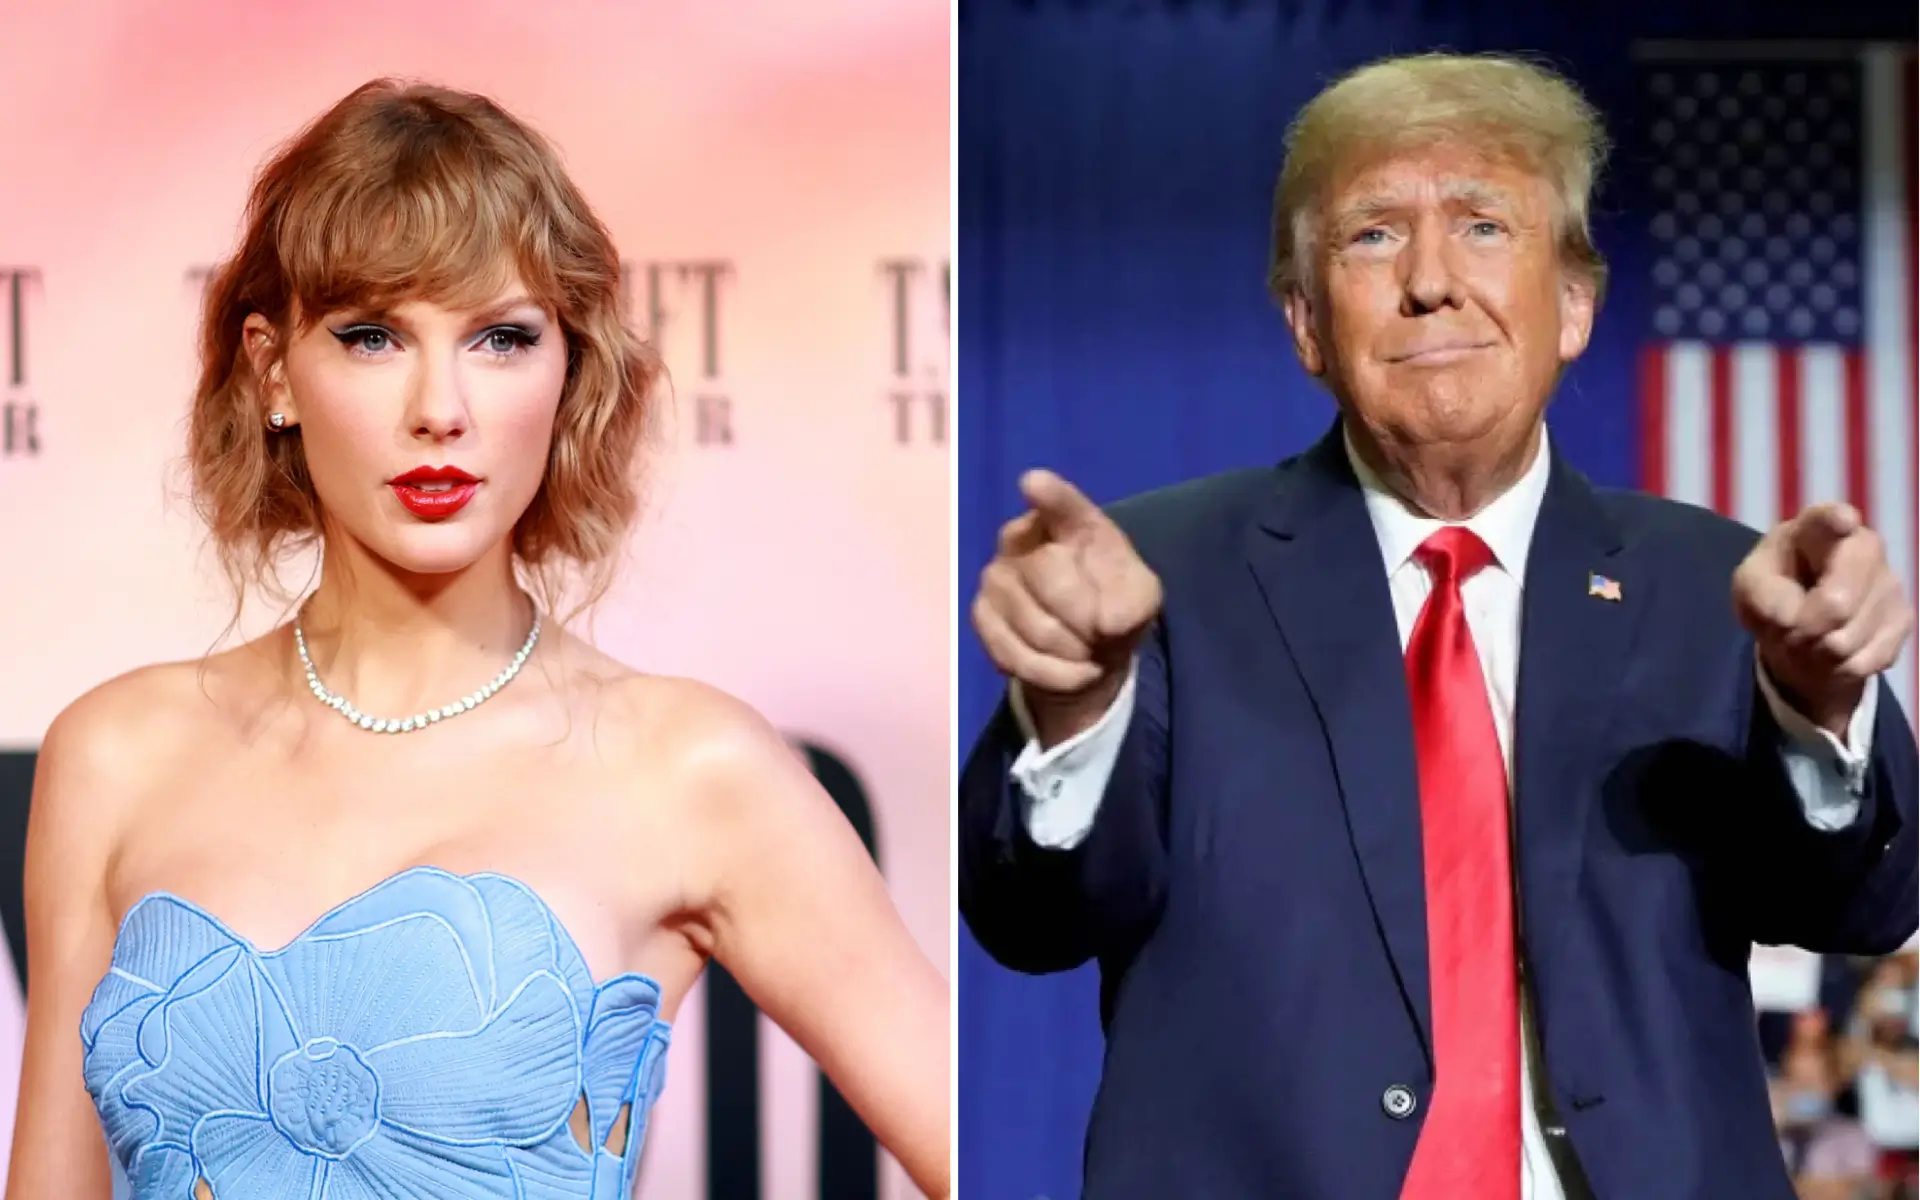 Taylor Swift And Trump Aides In A Holy War Of Words